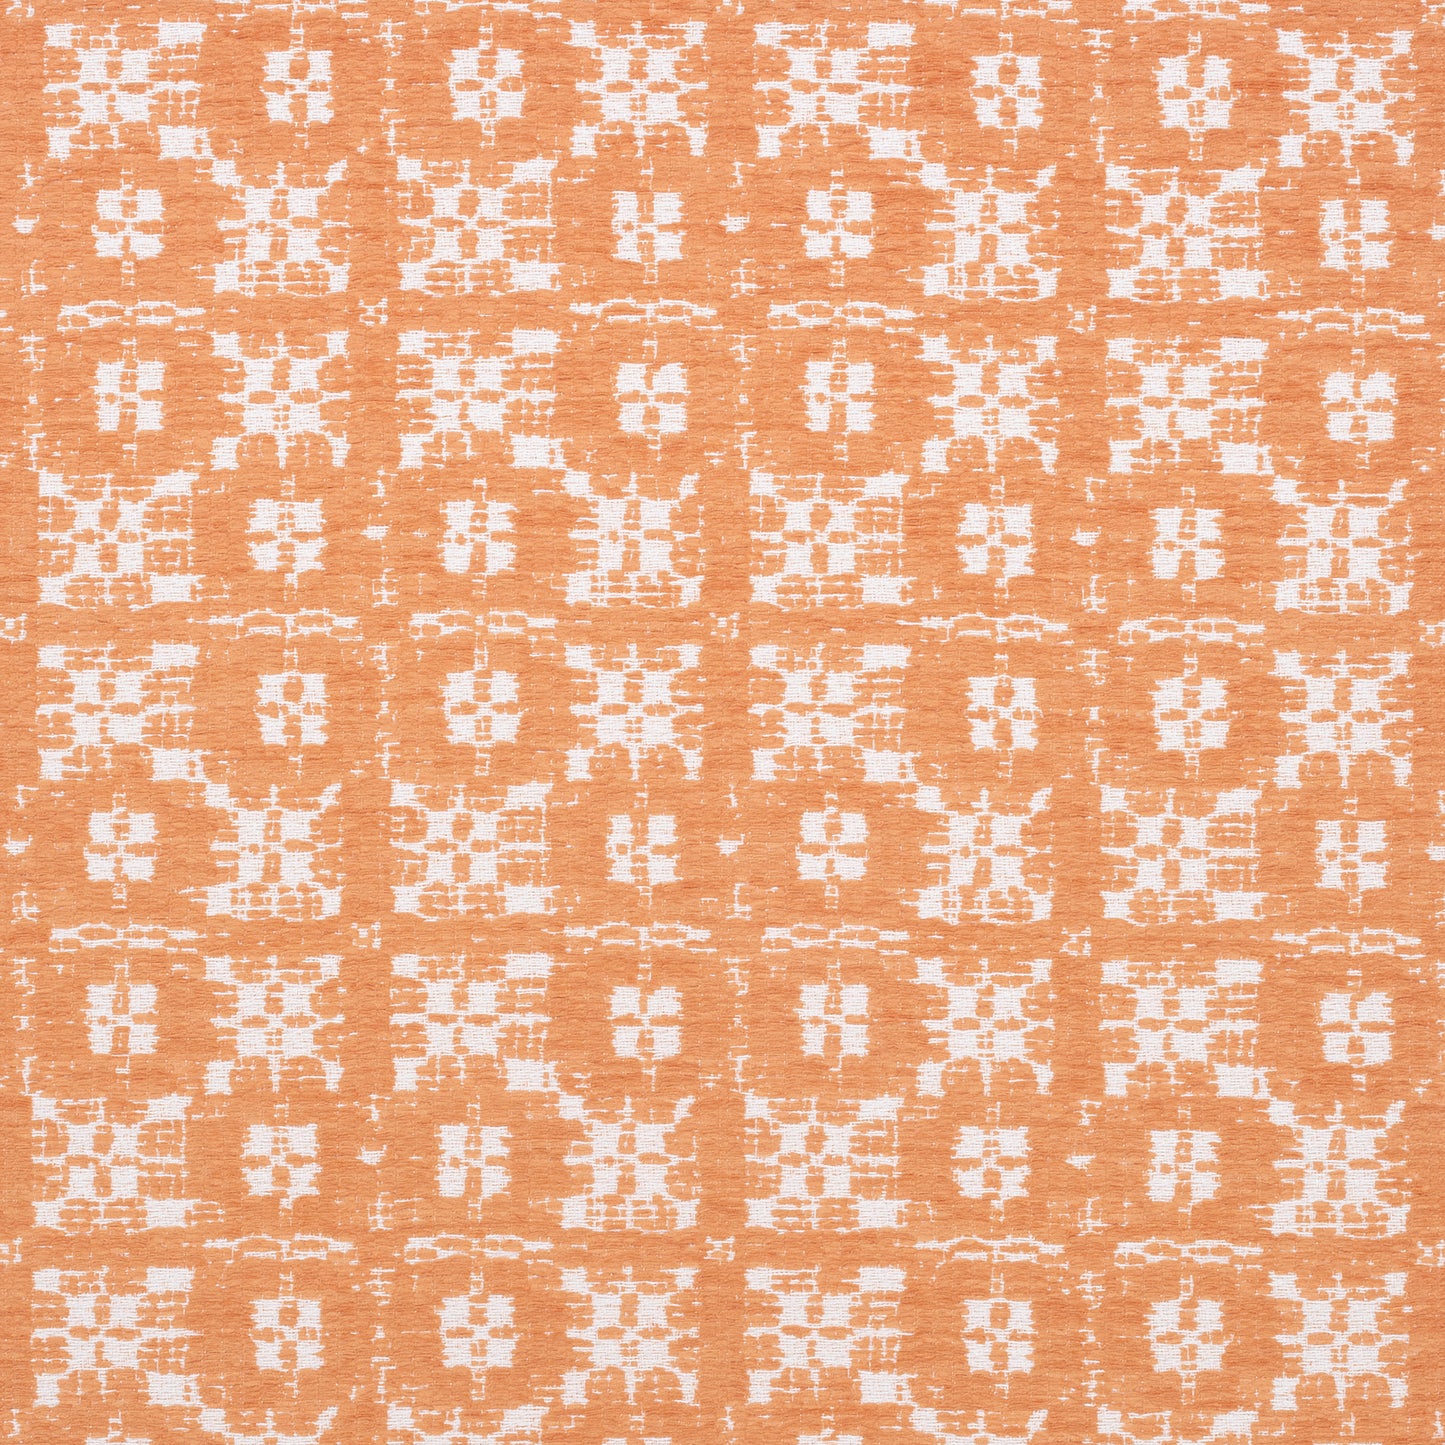 Purchase Thibaut Fabric Item W73499 pattern name Brimfield color Melon